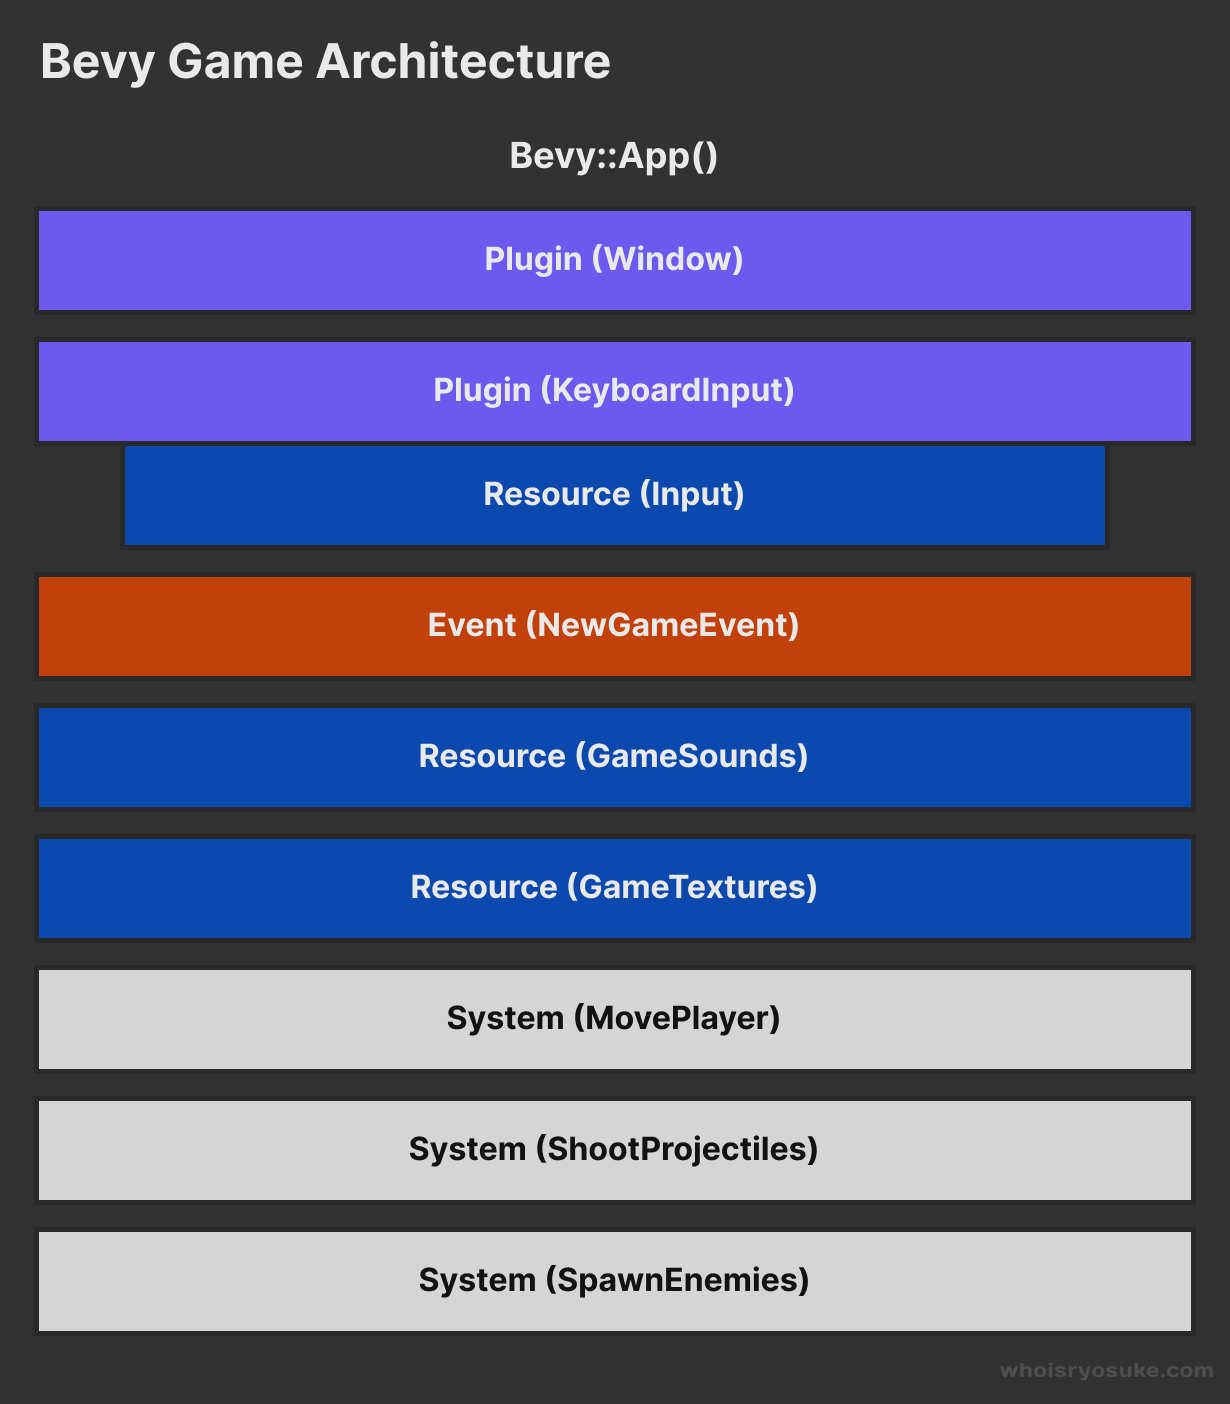 A diagram of a Bevy app architecture, from plugins like input to resources like Textures to events like NewGameEvent to systems like MovePlayer.